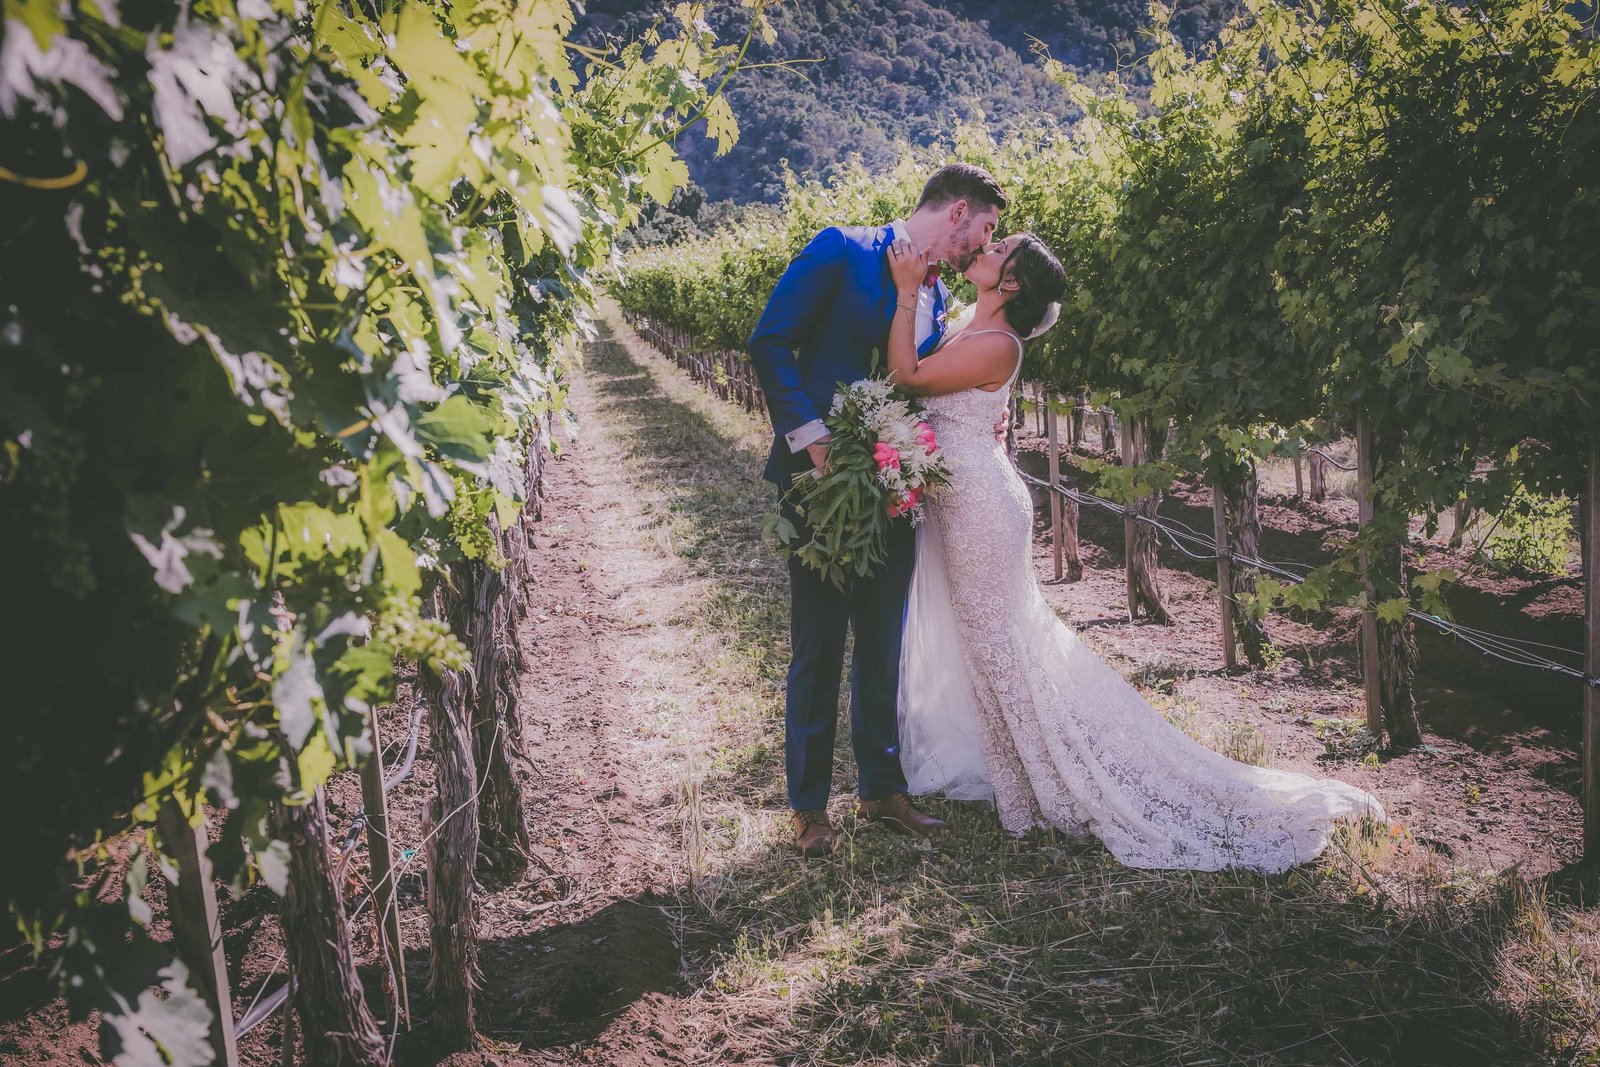 A couple stop to kiss in a vineyard located in Carmel.